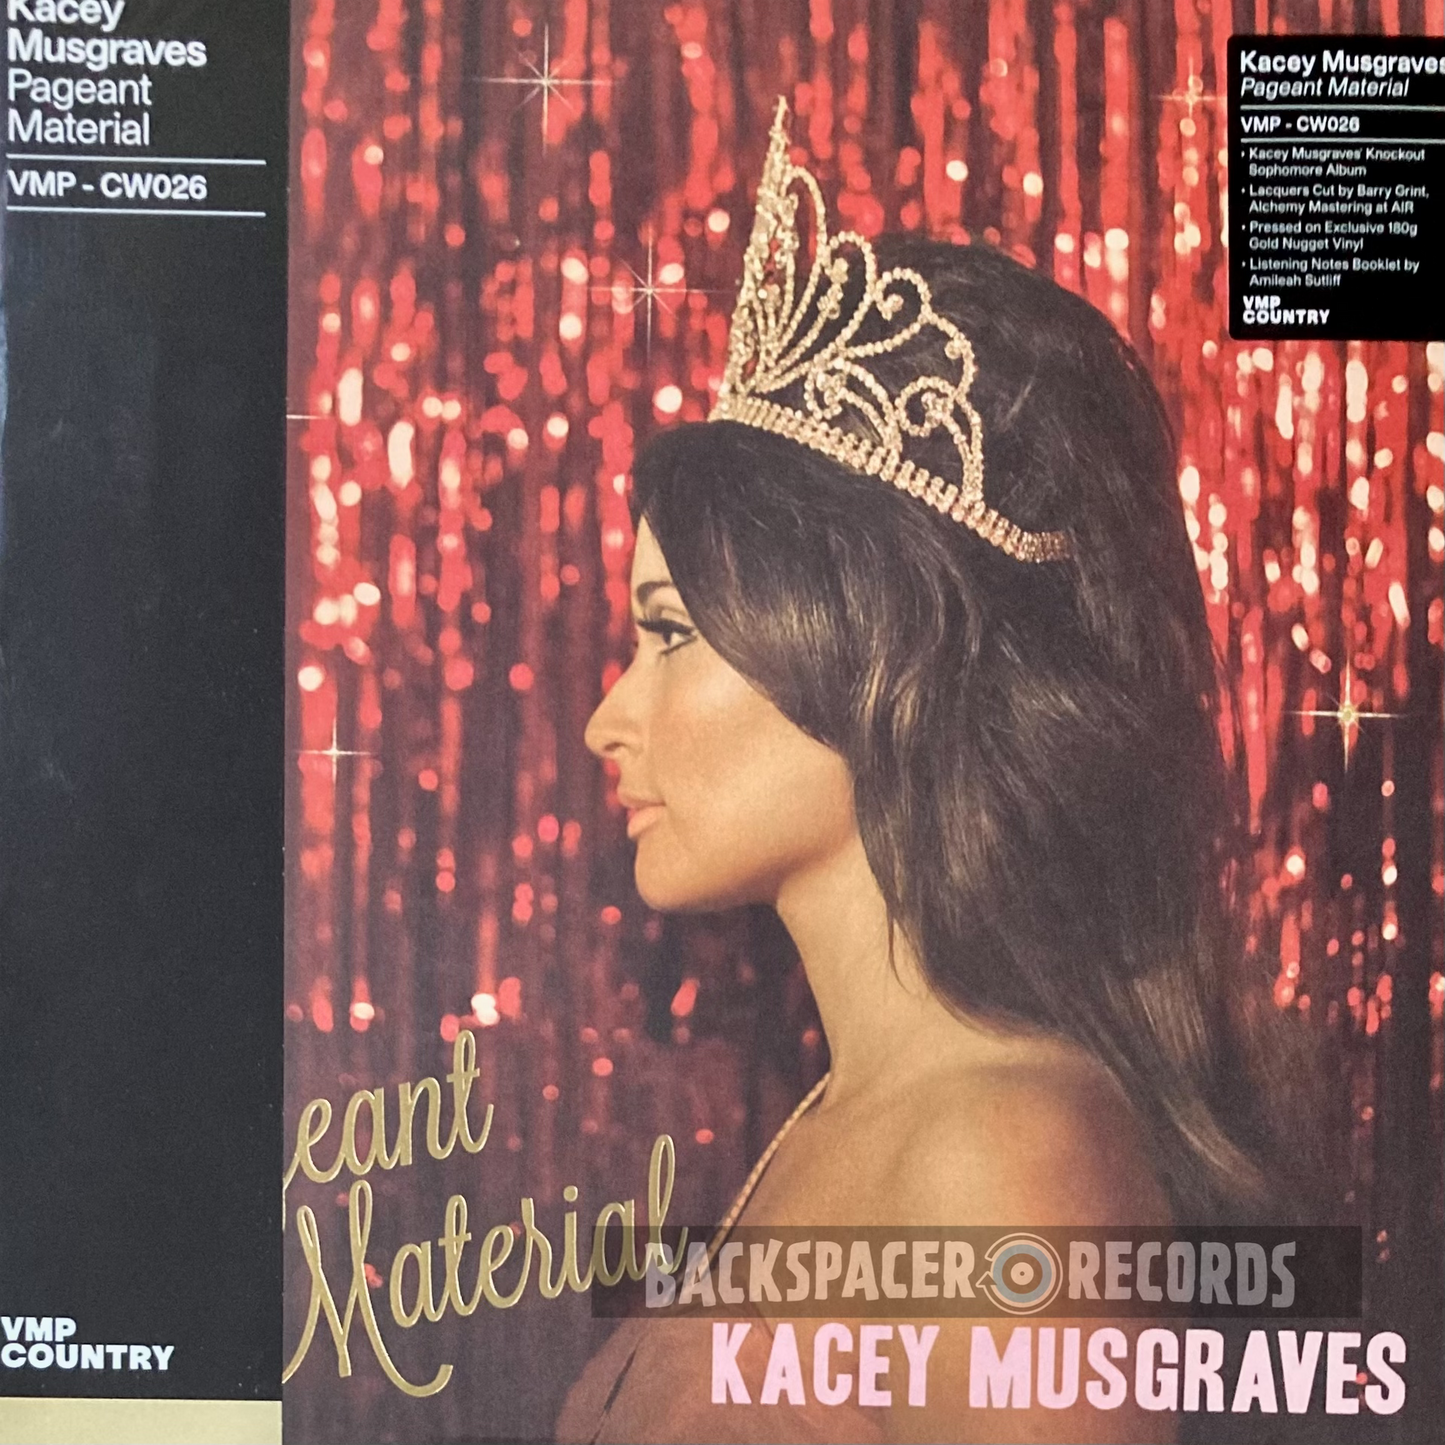 Kacey Musgraves – Pageant Material LP (VMP Exclusive)